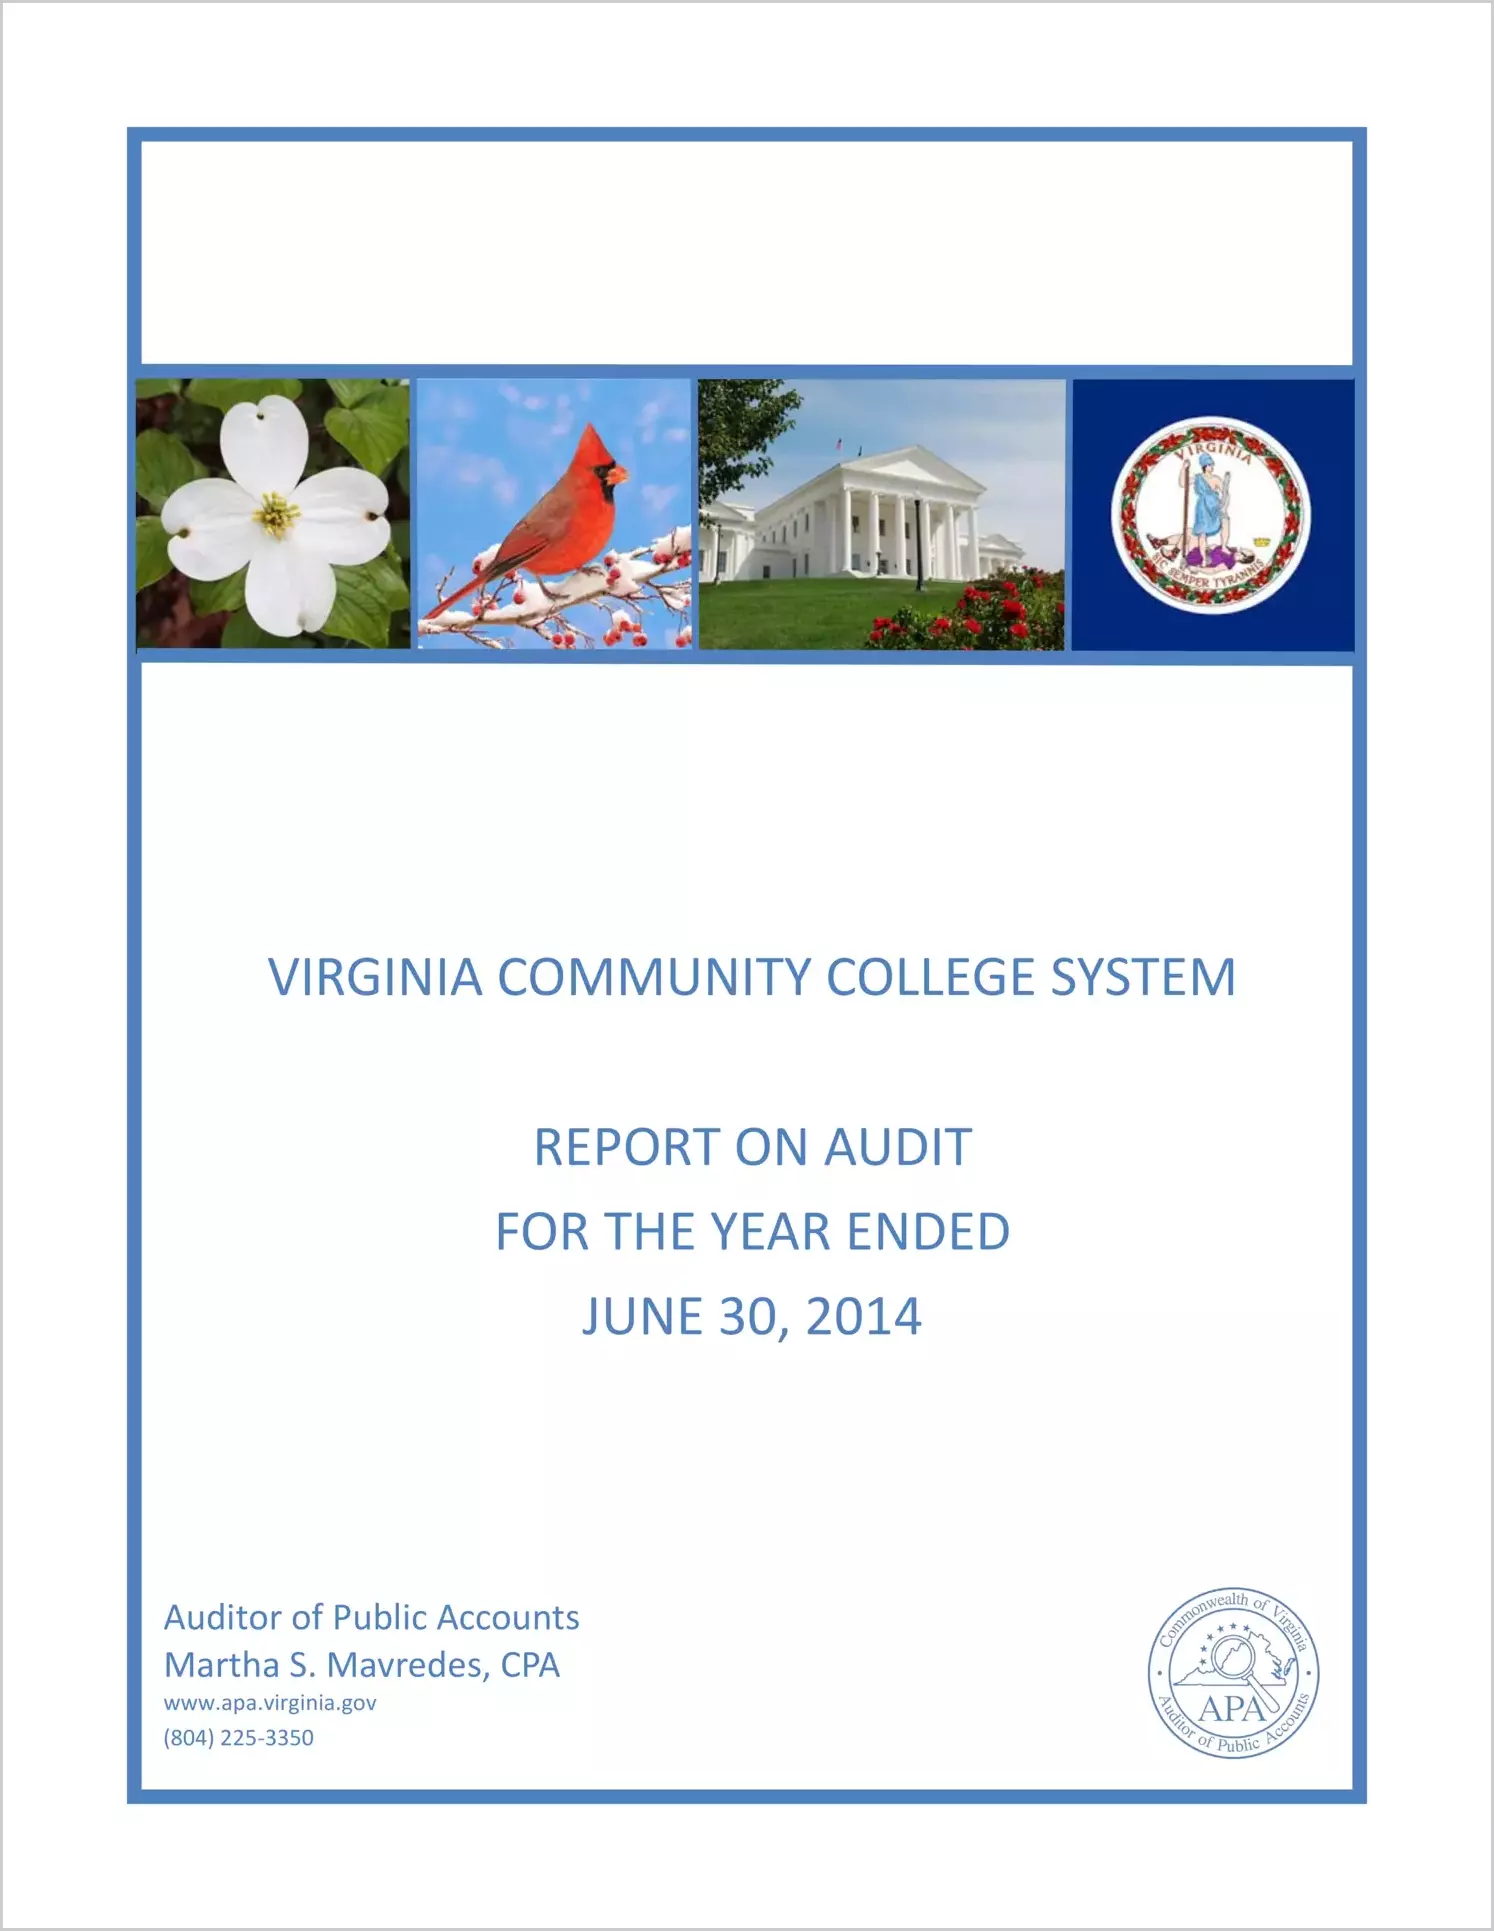 Virginia Community College System for the year ended June 30, 2014